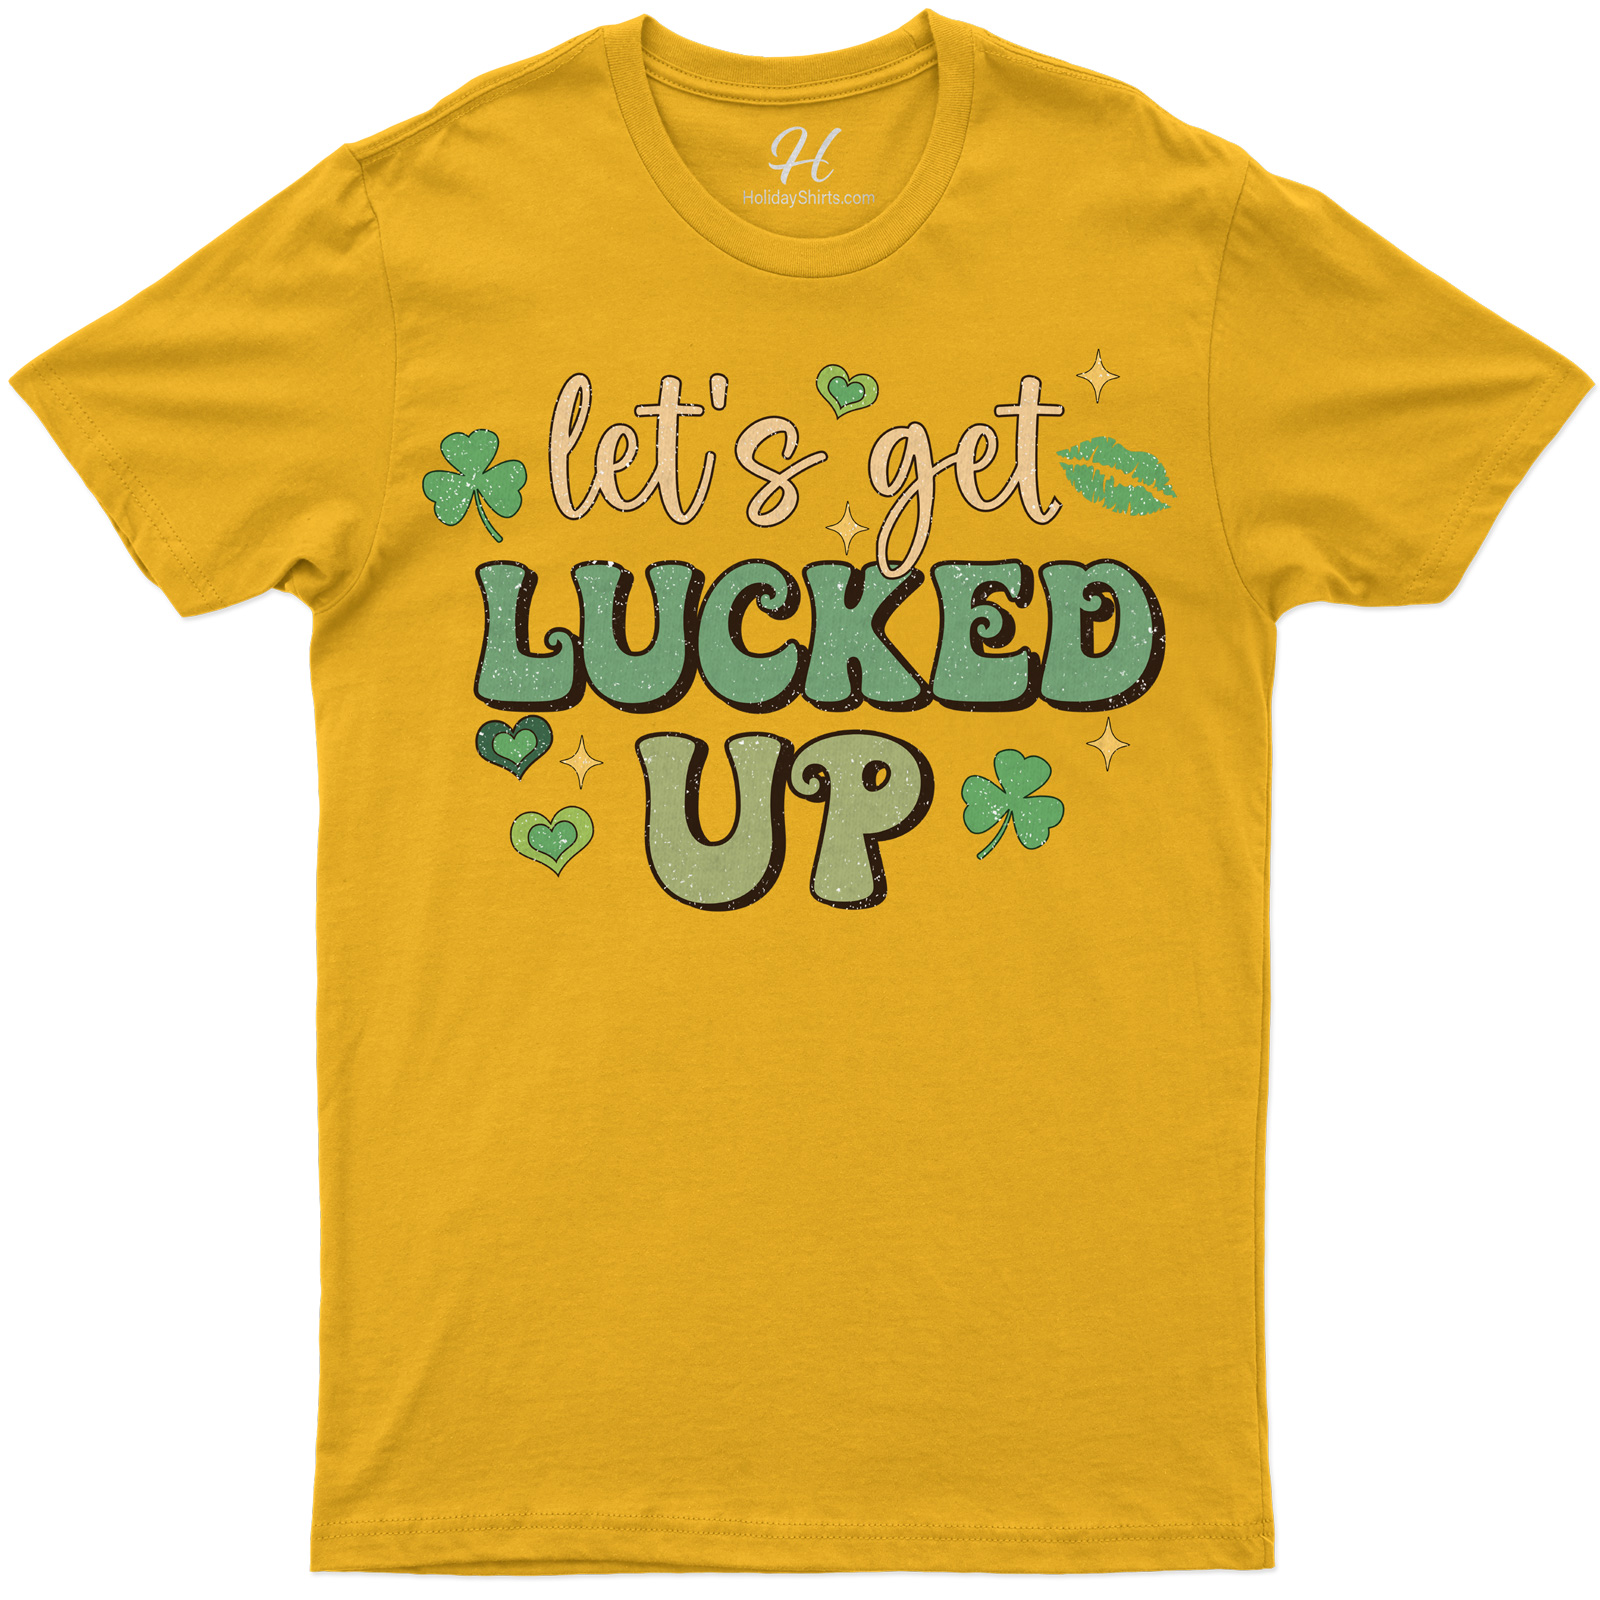 Festive St. Patrick's Day 'let's Get Lucked Up' Graphic Tee-shirt With Clover And Star Accents